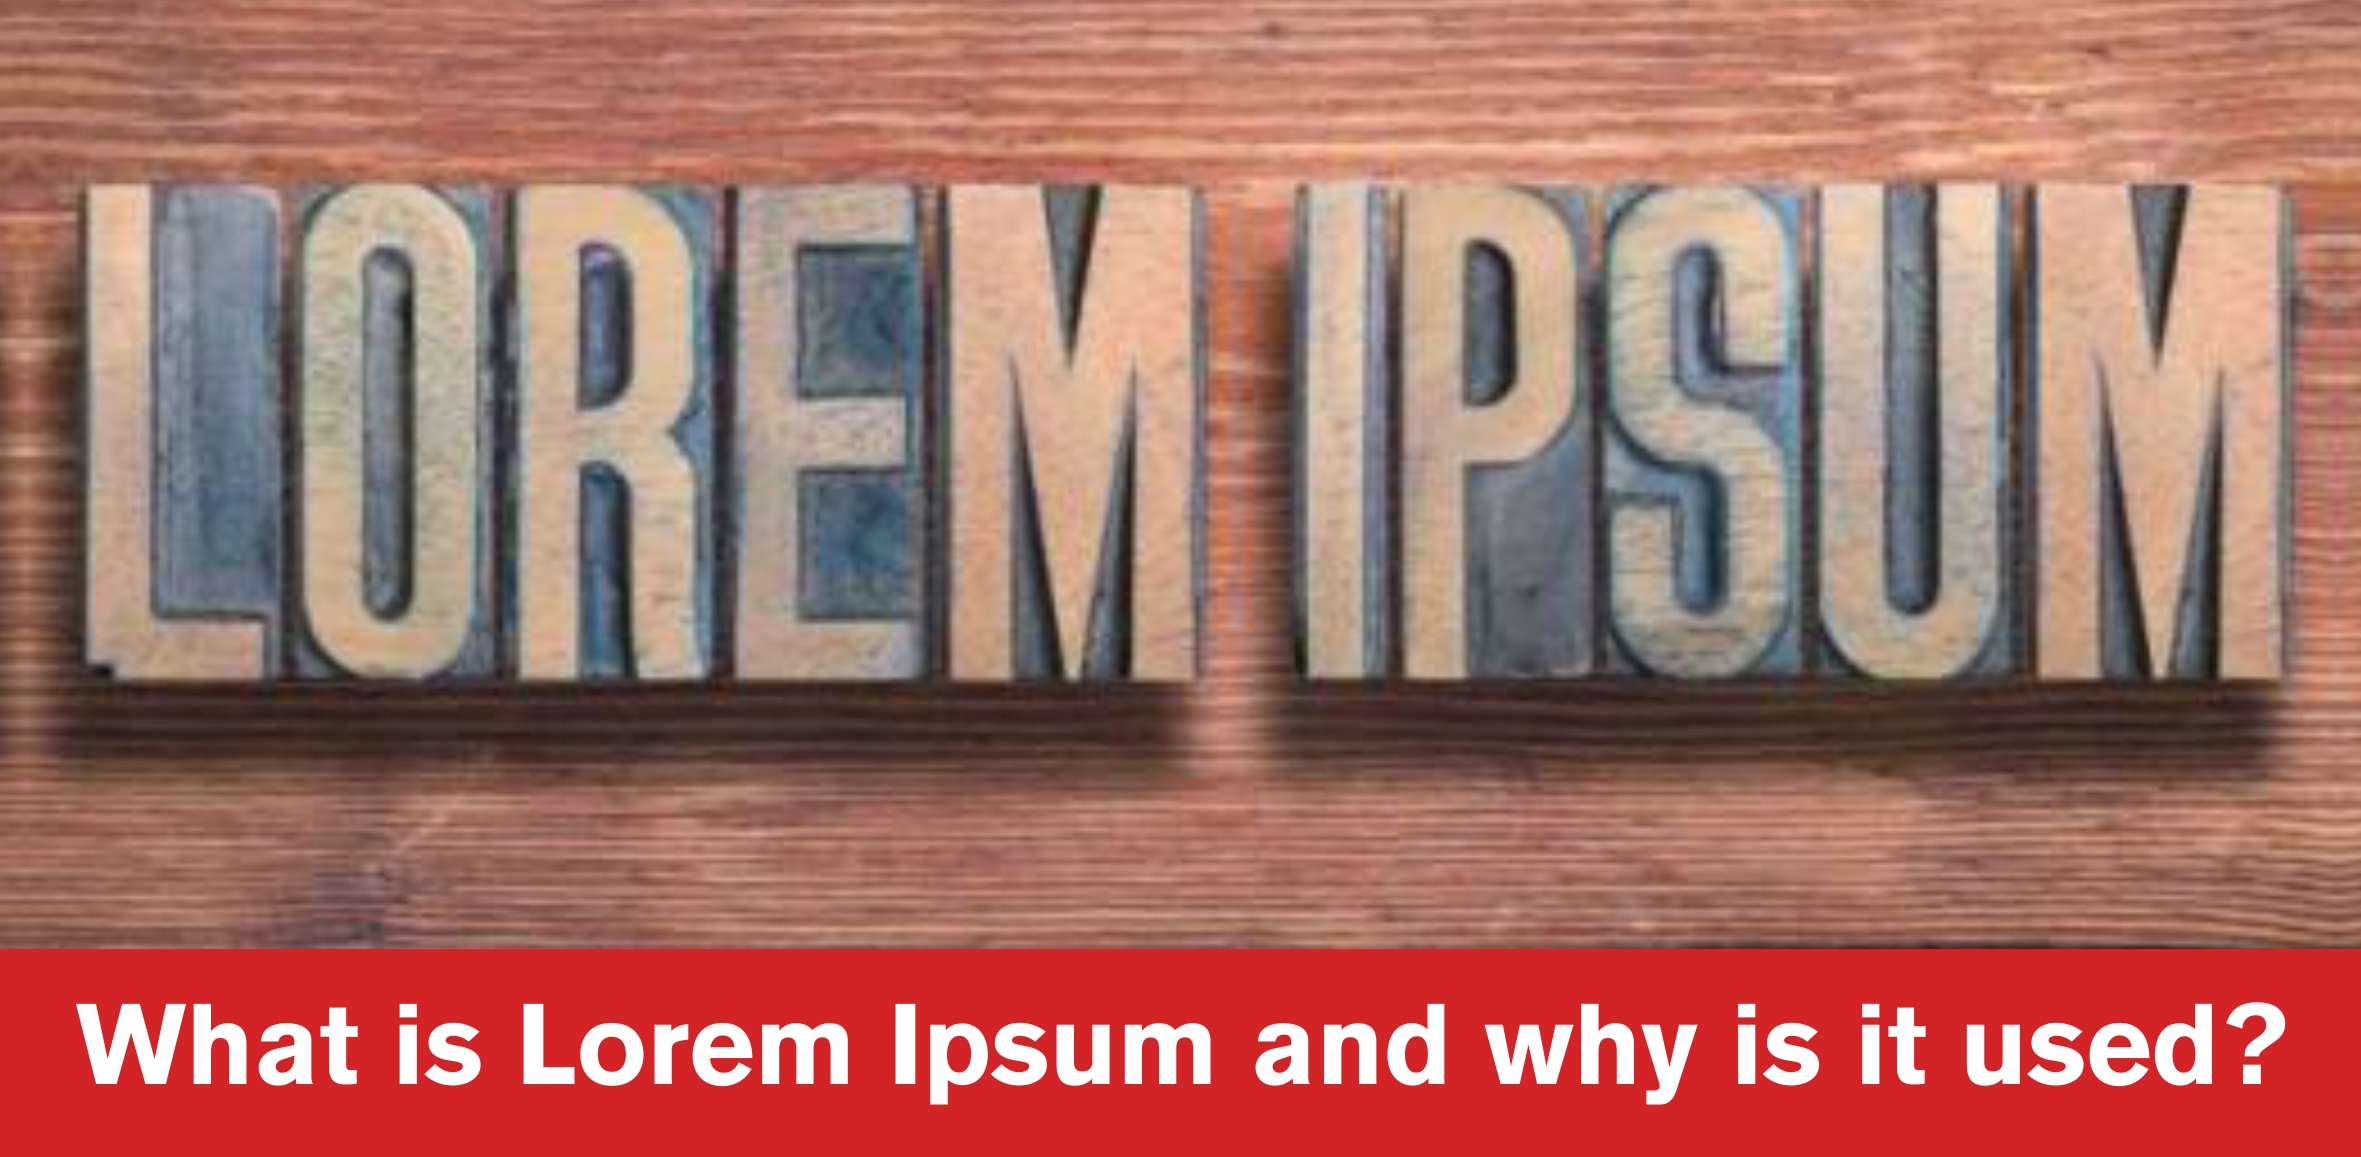 What is Lorem Ipsum and why is it used?